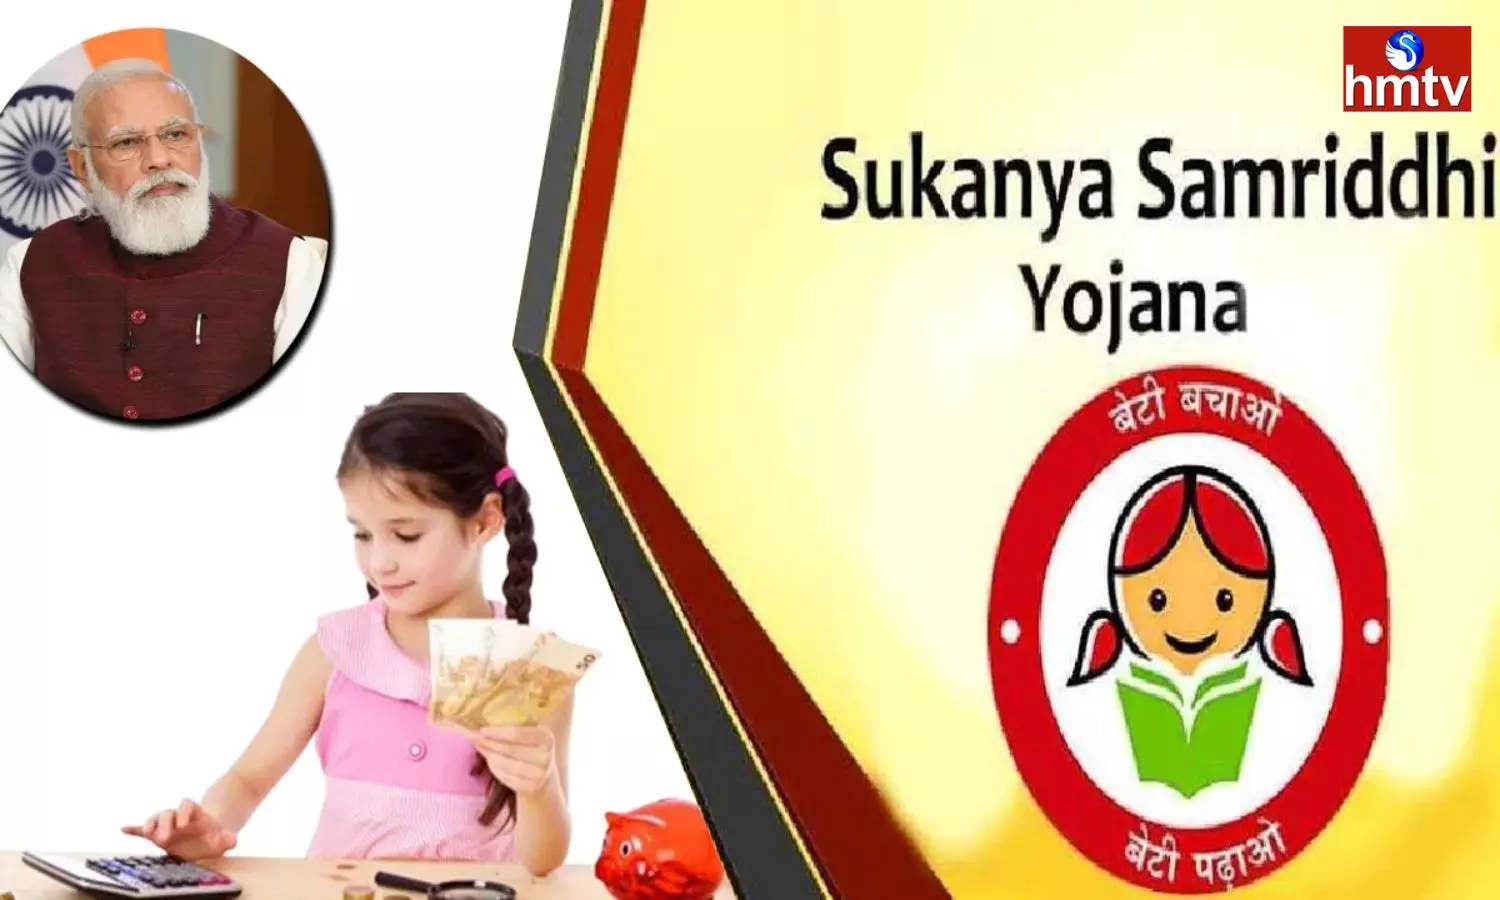 You Can Know How Much Money Is Deposited In The Sukanya Samriddhi Yojana Account From Home